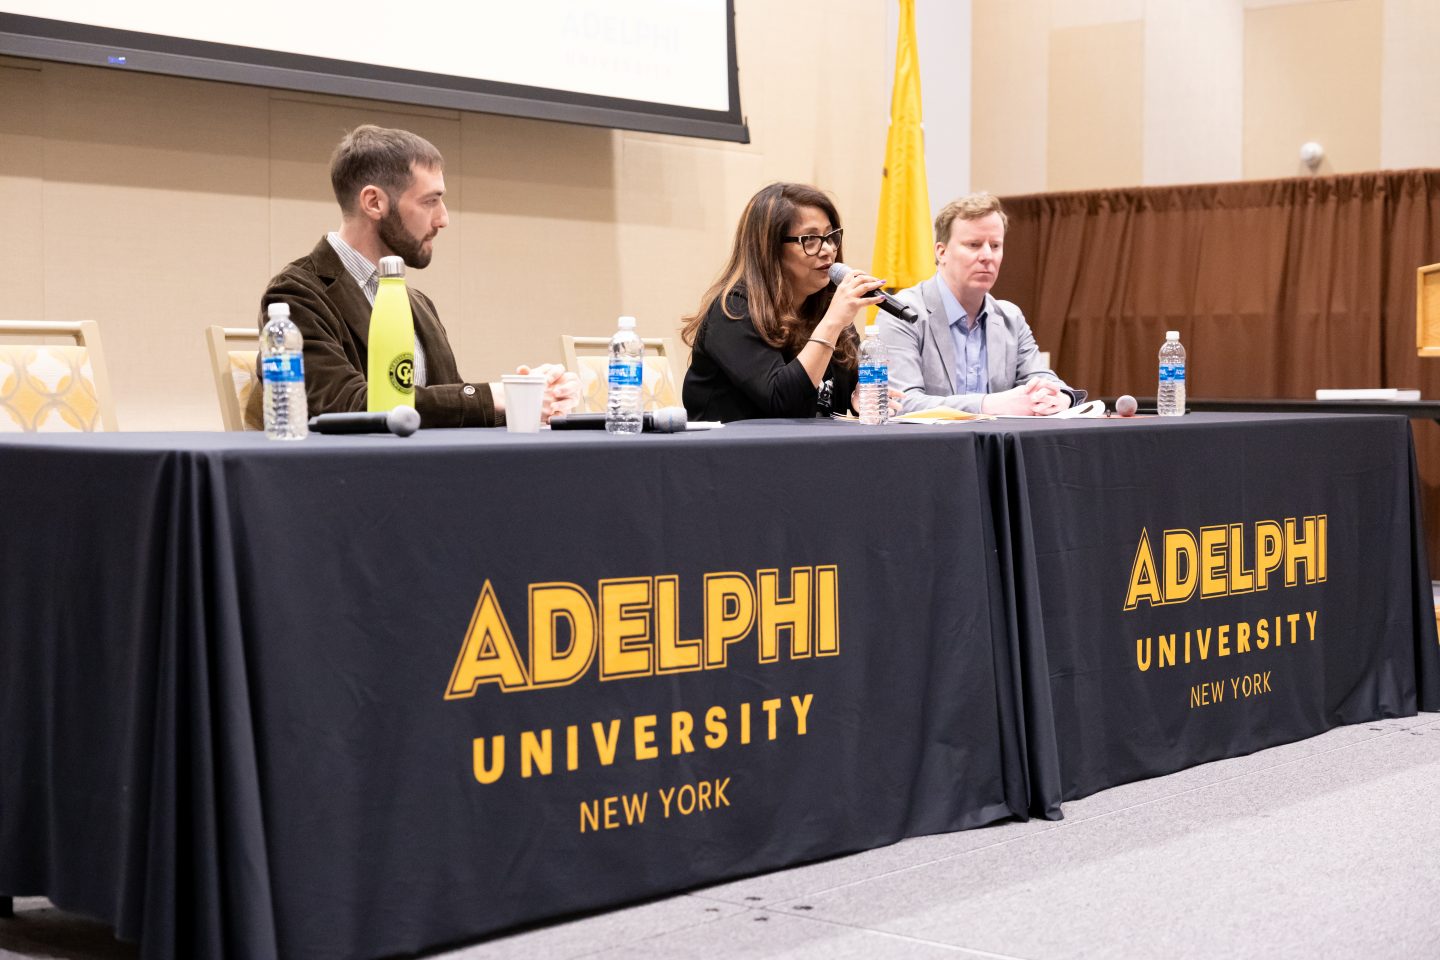 Three adults—two men and one female—are seated at a table draped with Adelphi University signage. She, with long brown hair, eyeglasses and wearing a black blouse, is speaking into a microphone, as the men listen—one with short brown hair and a short beard, wearing a brown jacket and striped shirt, and the other with light brown hair, a pale gray suit jacket and light blue shirt. Four bottles of water are on the table, with a large video screen hanging in the background.  